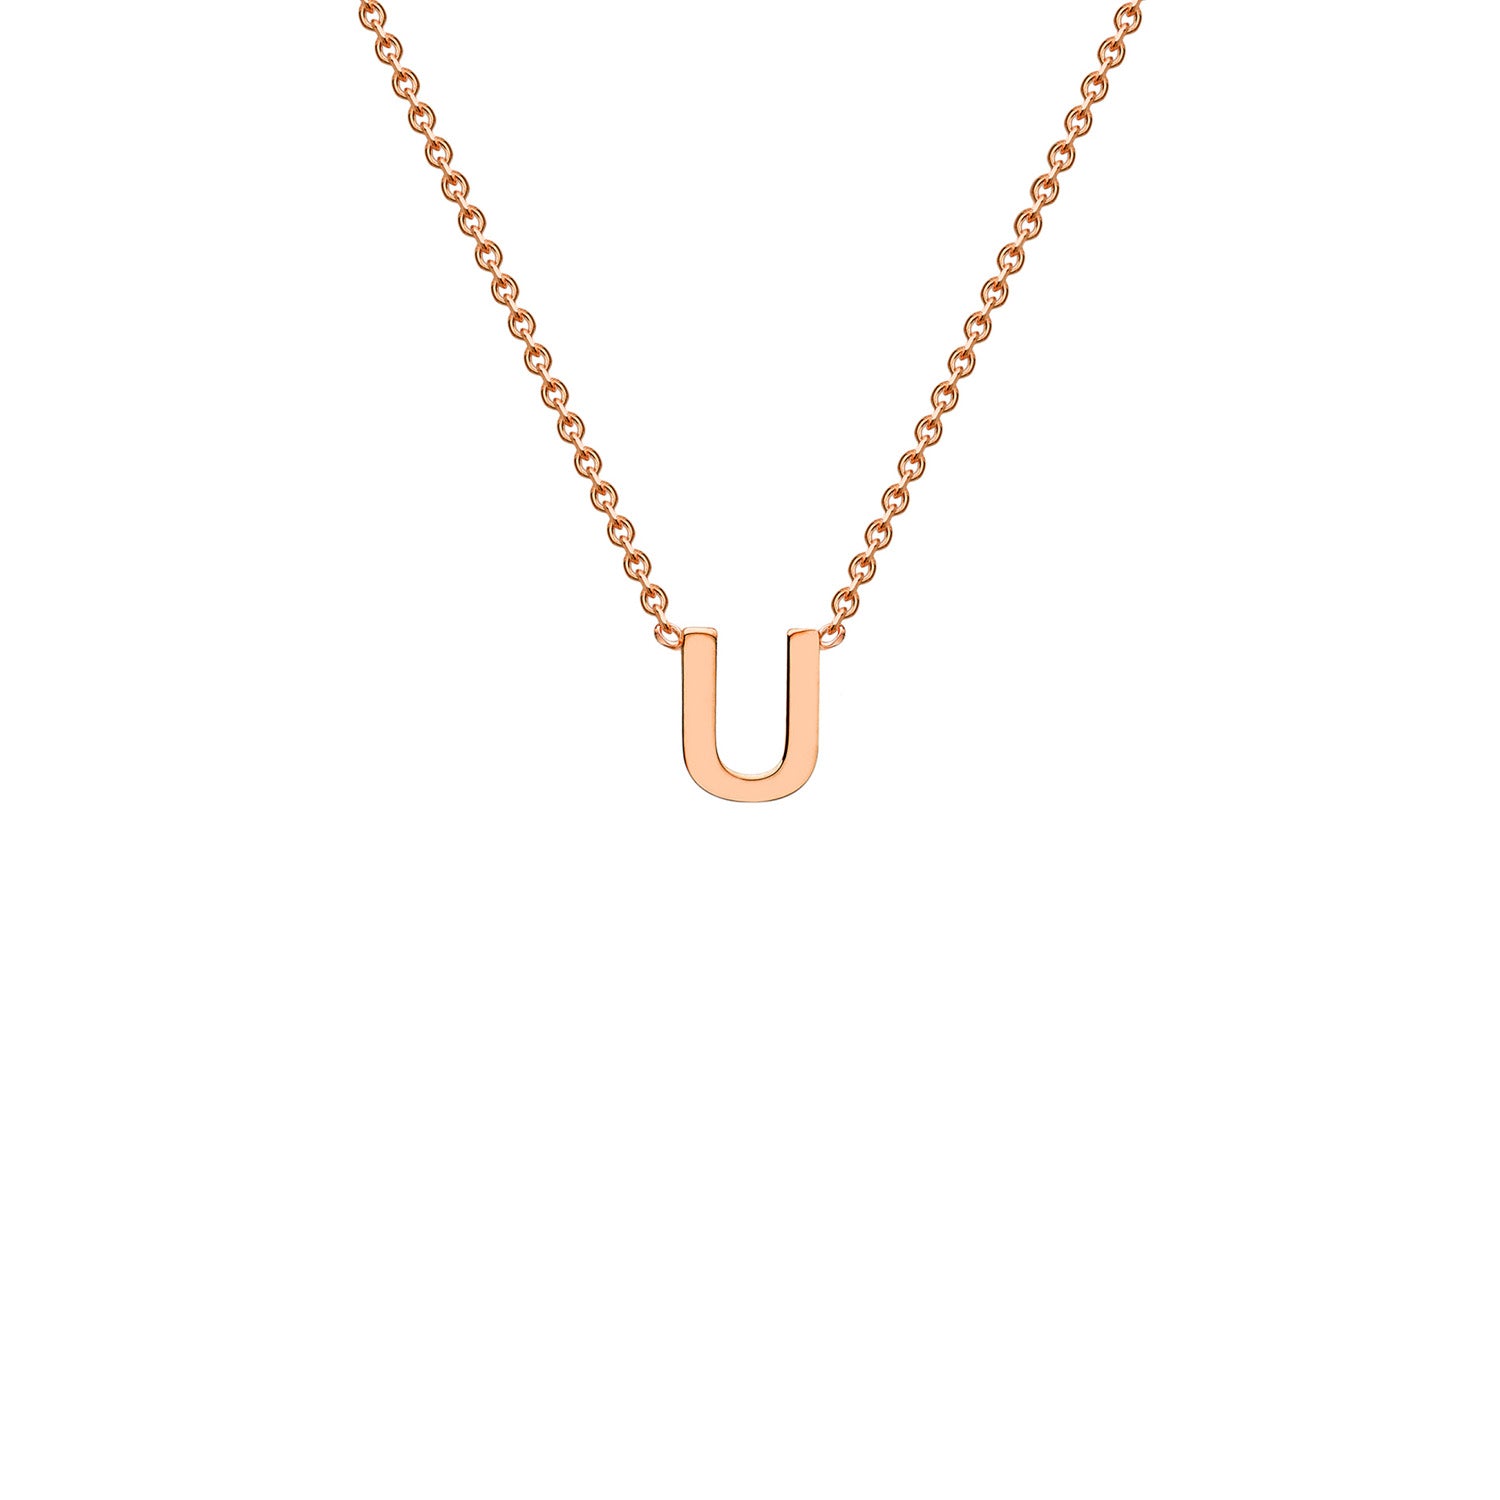 9k Rose Gold Petite Initial Necklace